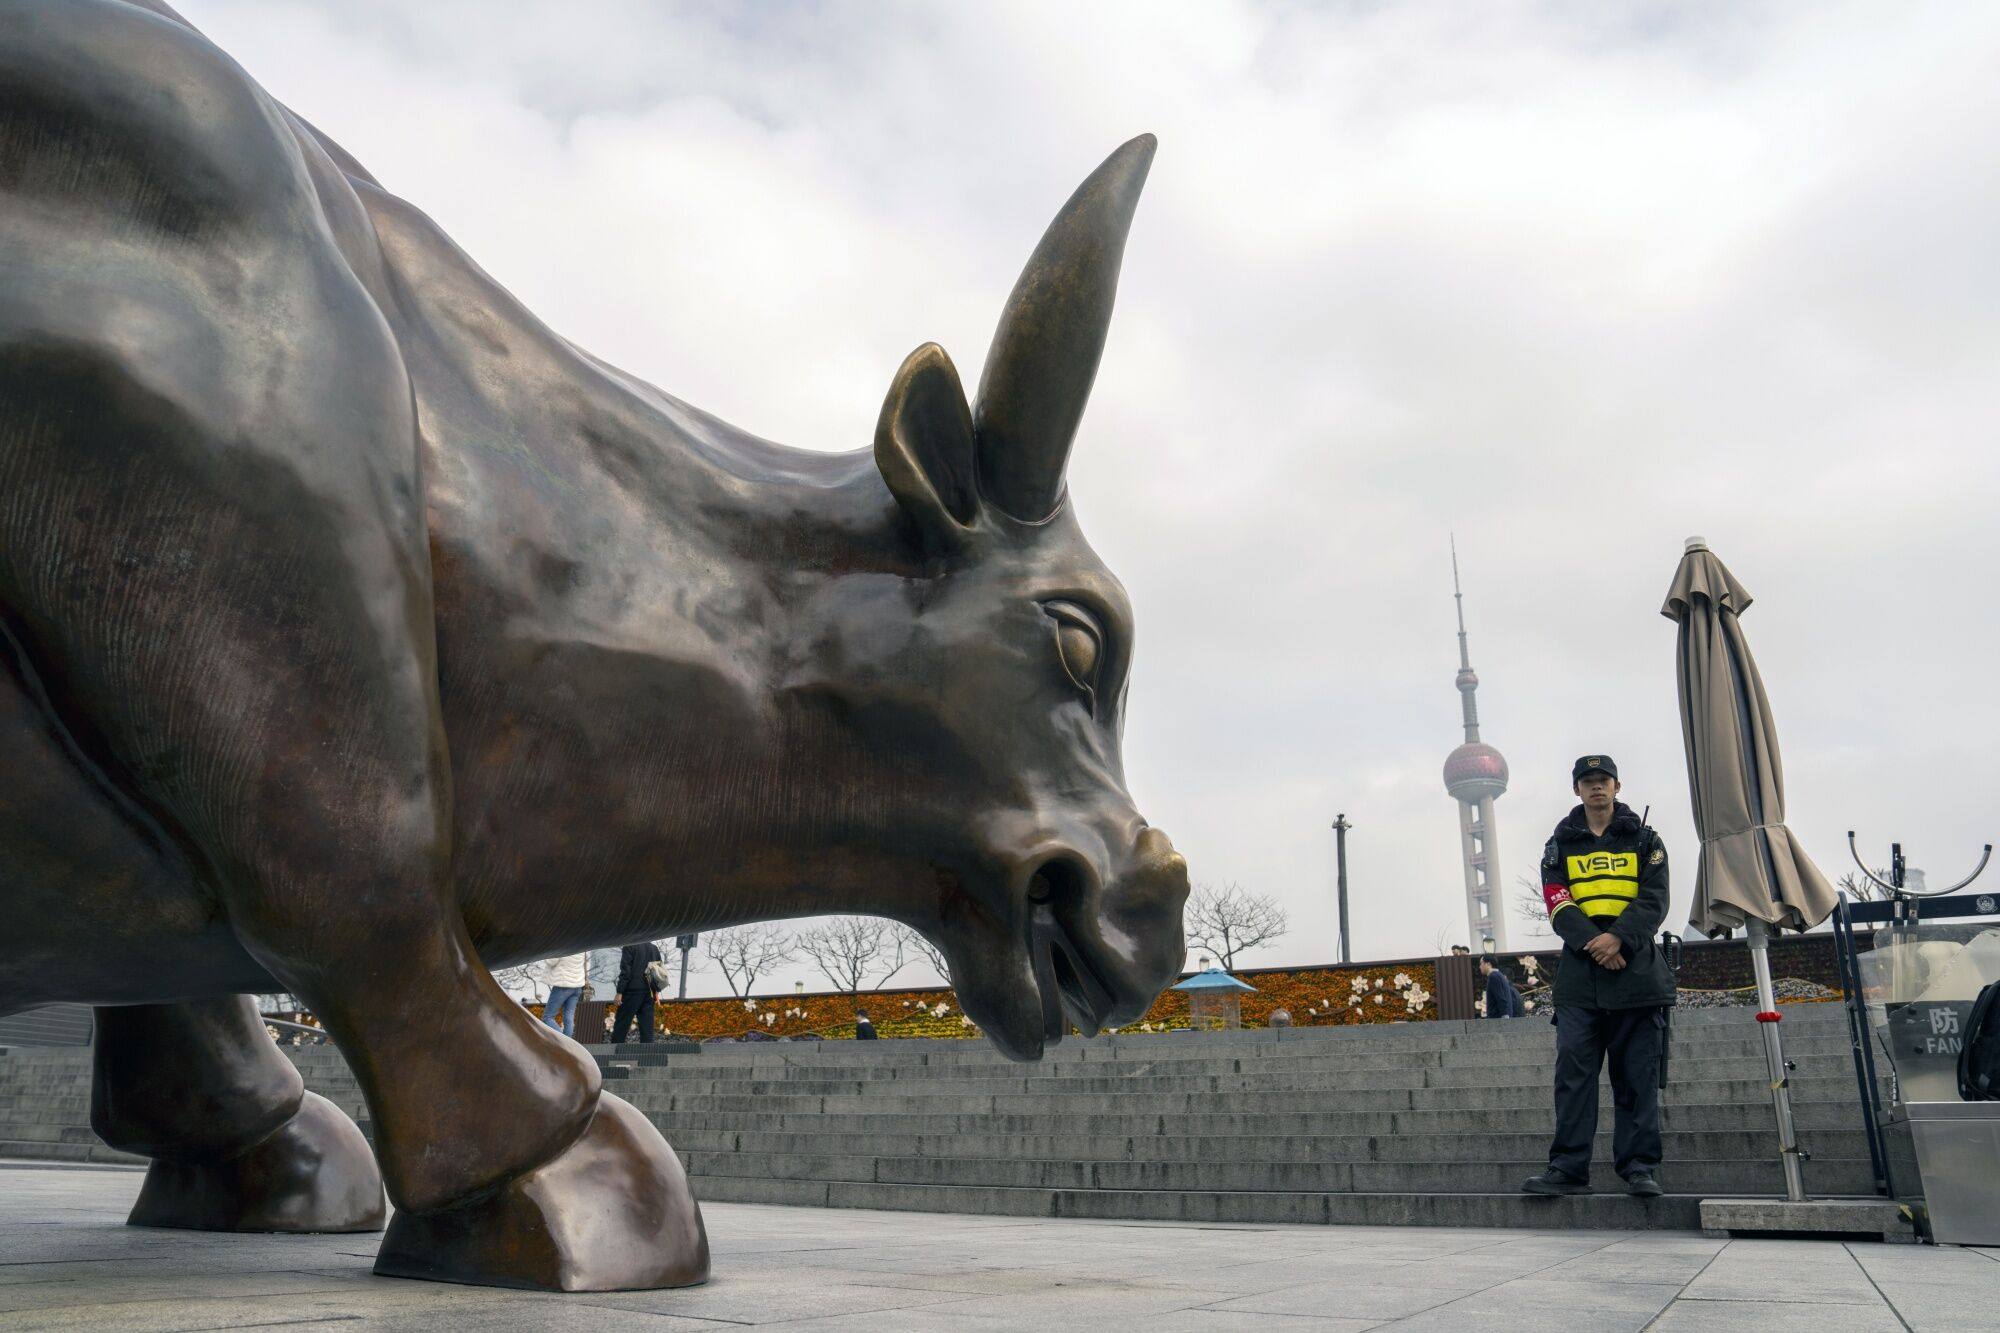 The Bund Bull in Shanghai. Improved corporate earnings are crucial to the upwards momentum in Chinese stocks which have rallied since February. Photo: Bloomberg